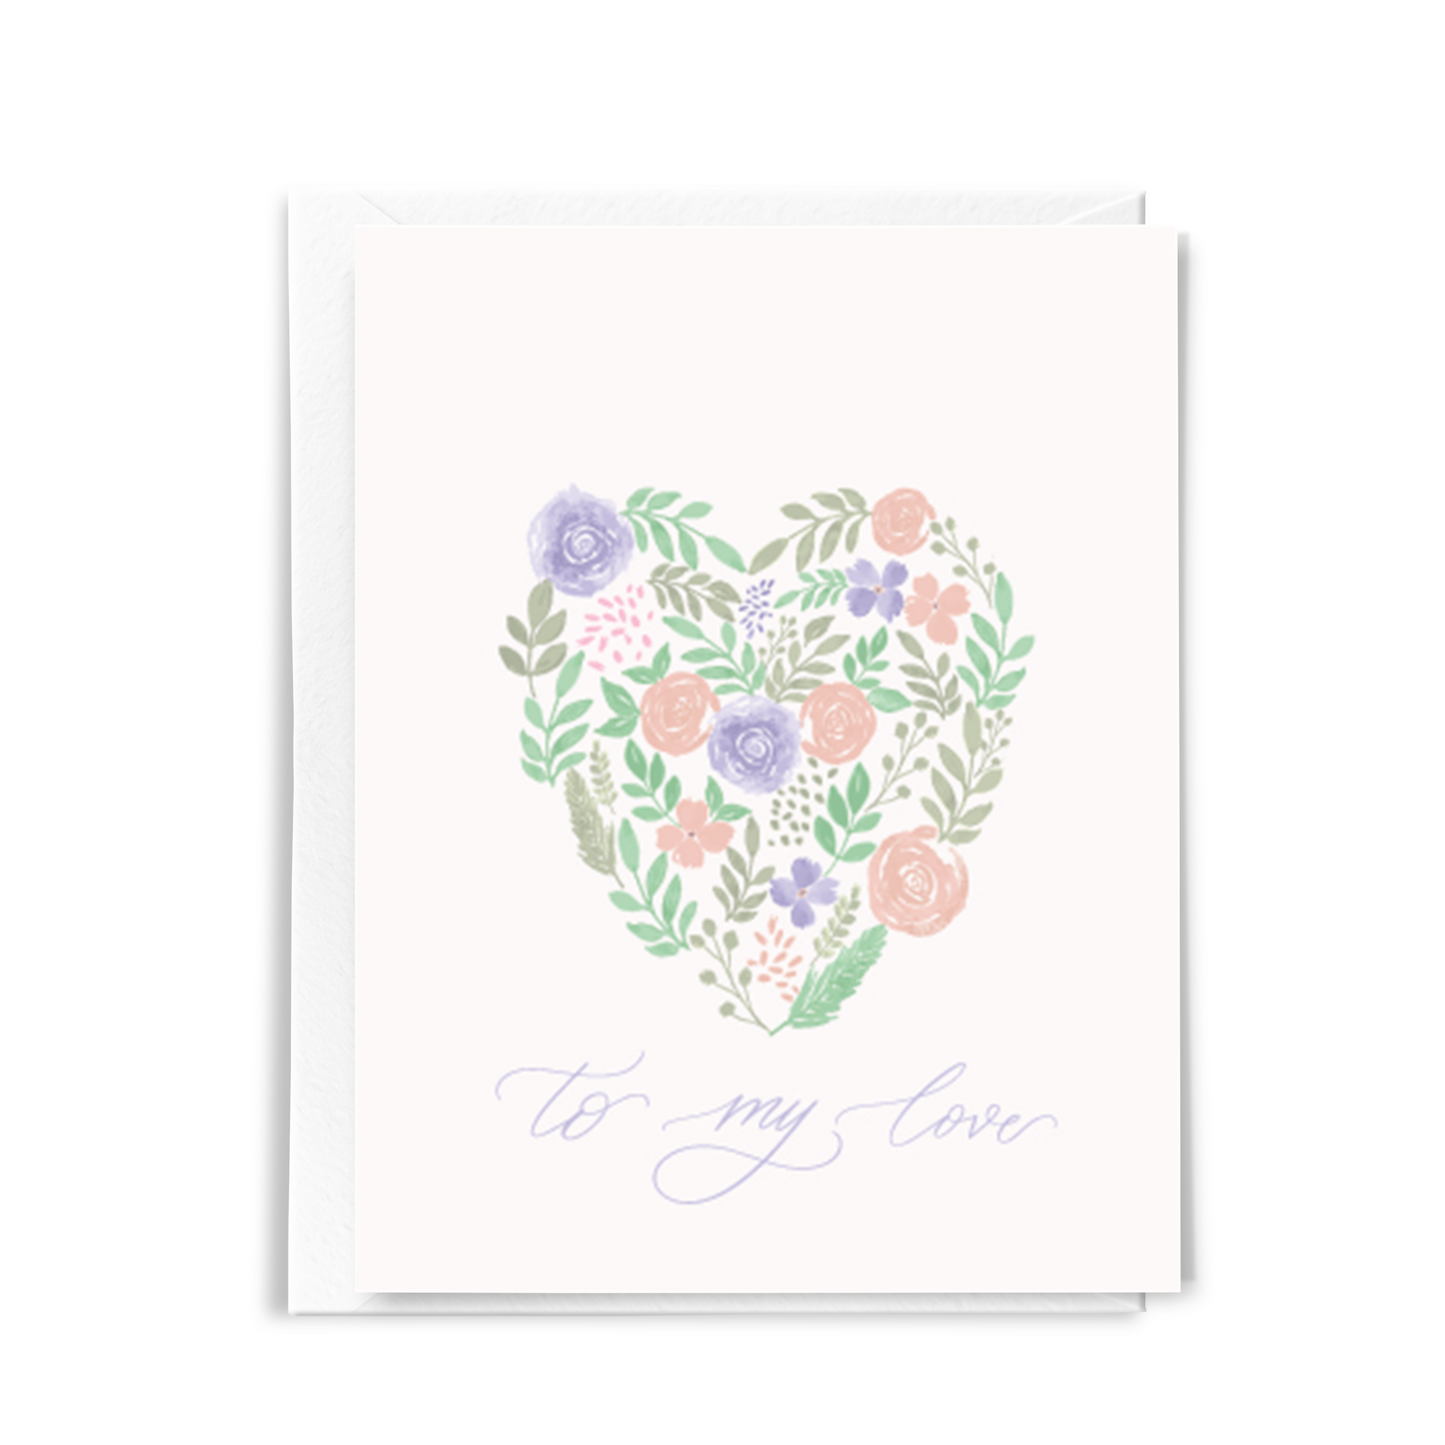 Watercolor Love Card - To My Love